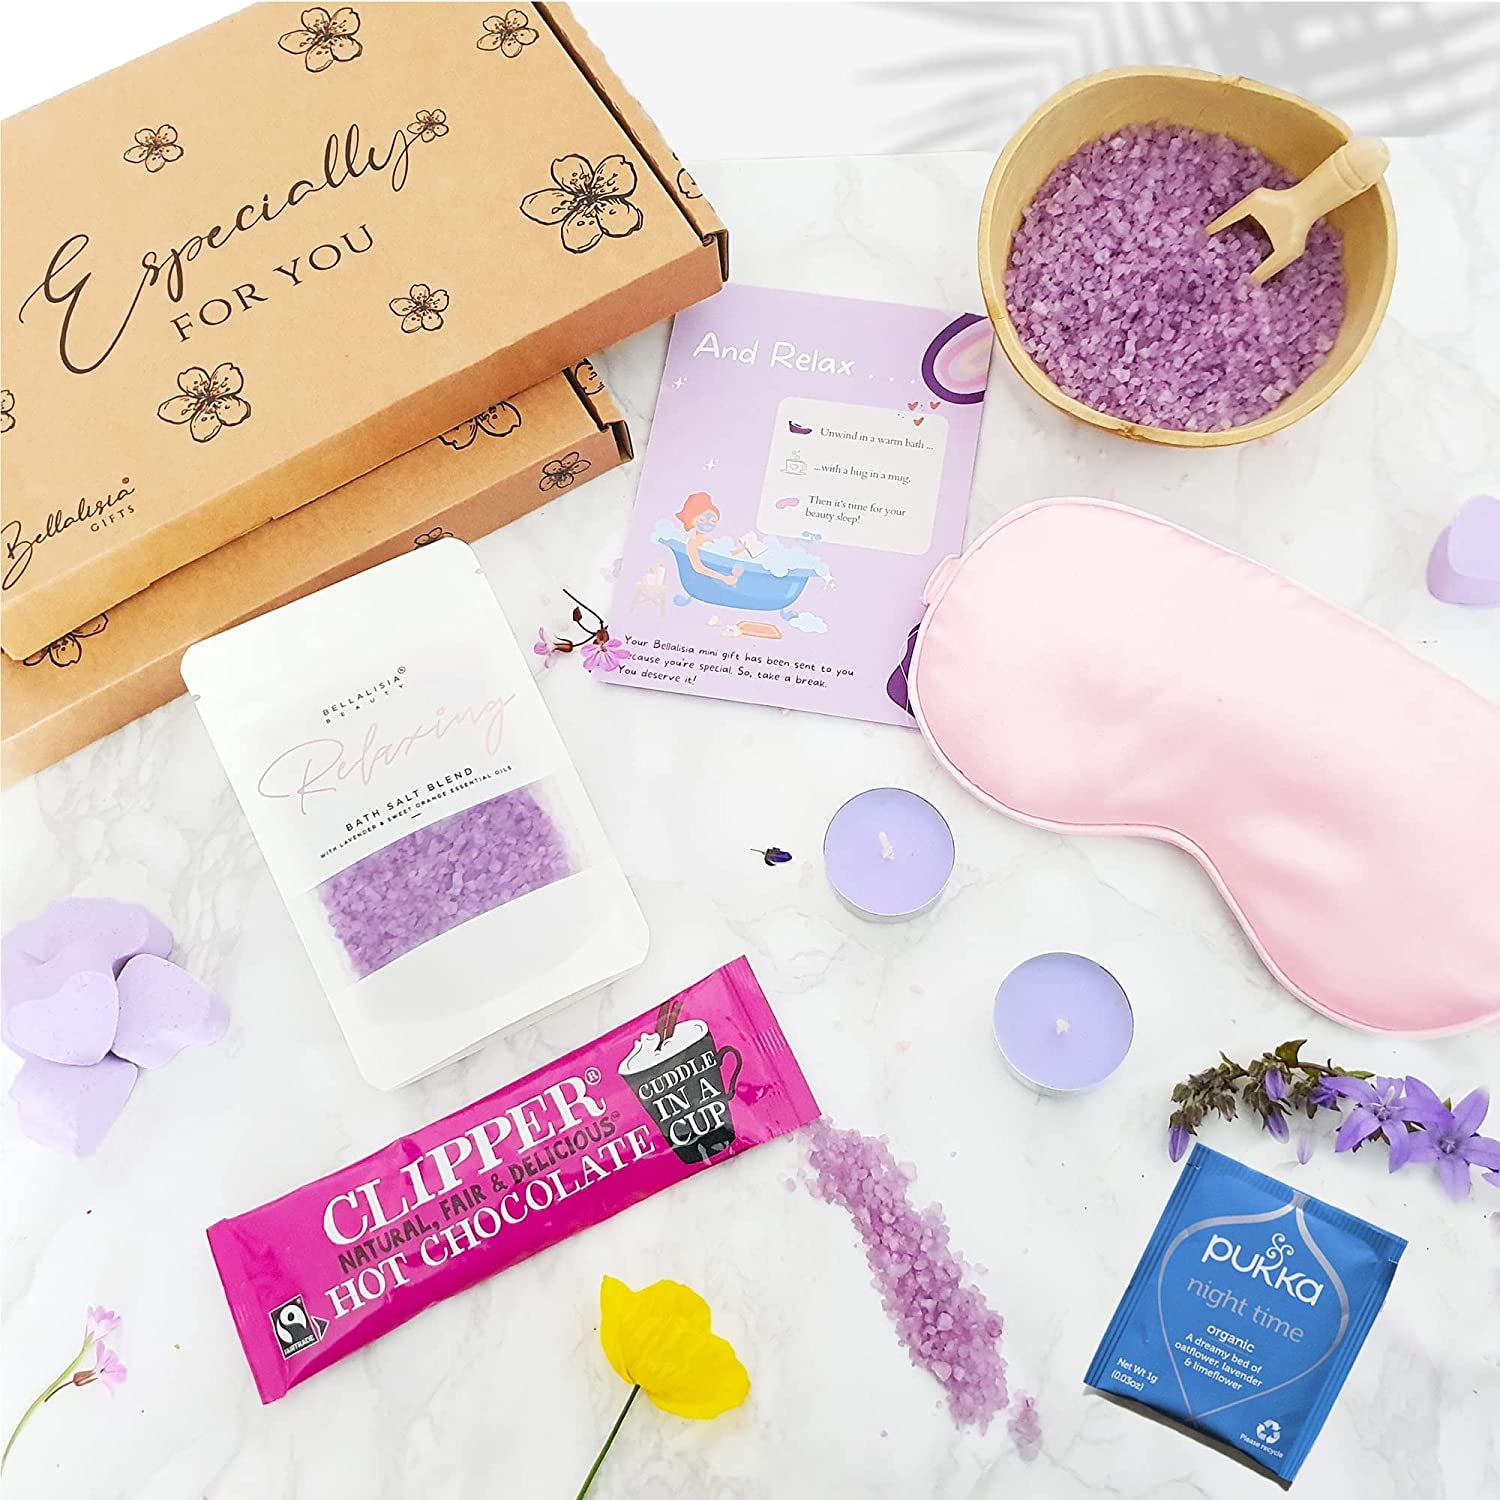 Relaxation Gifts for Women De Stress Self Care Pamper Hamper Kit, Hug in a Box Bath Presents Relaxing Mums Gift Set, Brilliant Christmas Gifts or Birthdays Gifts for Her to Relax and Enjoy